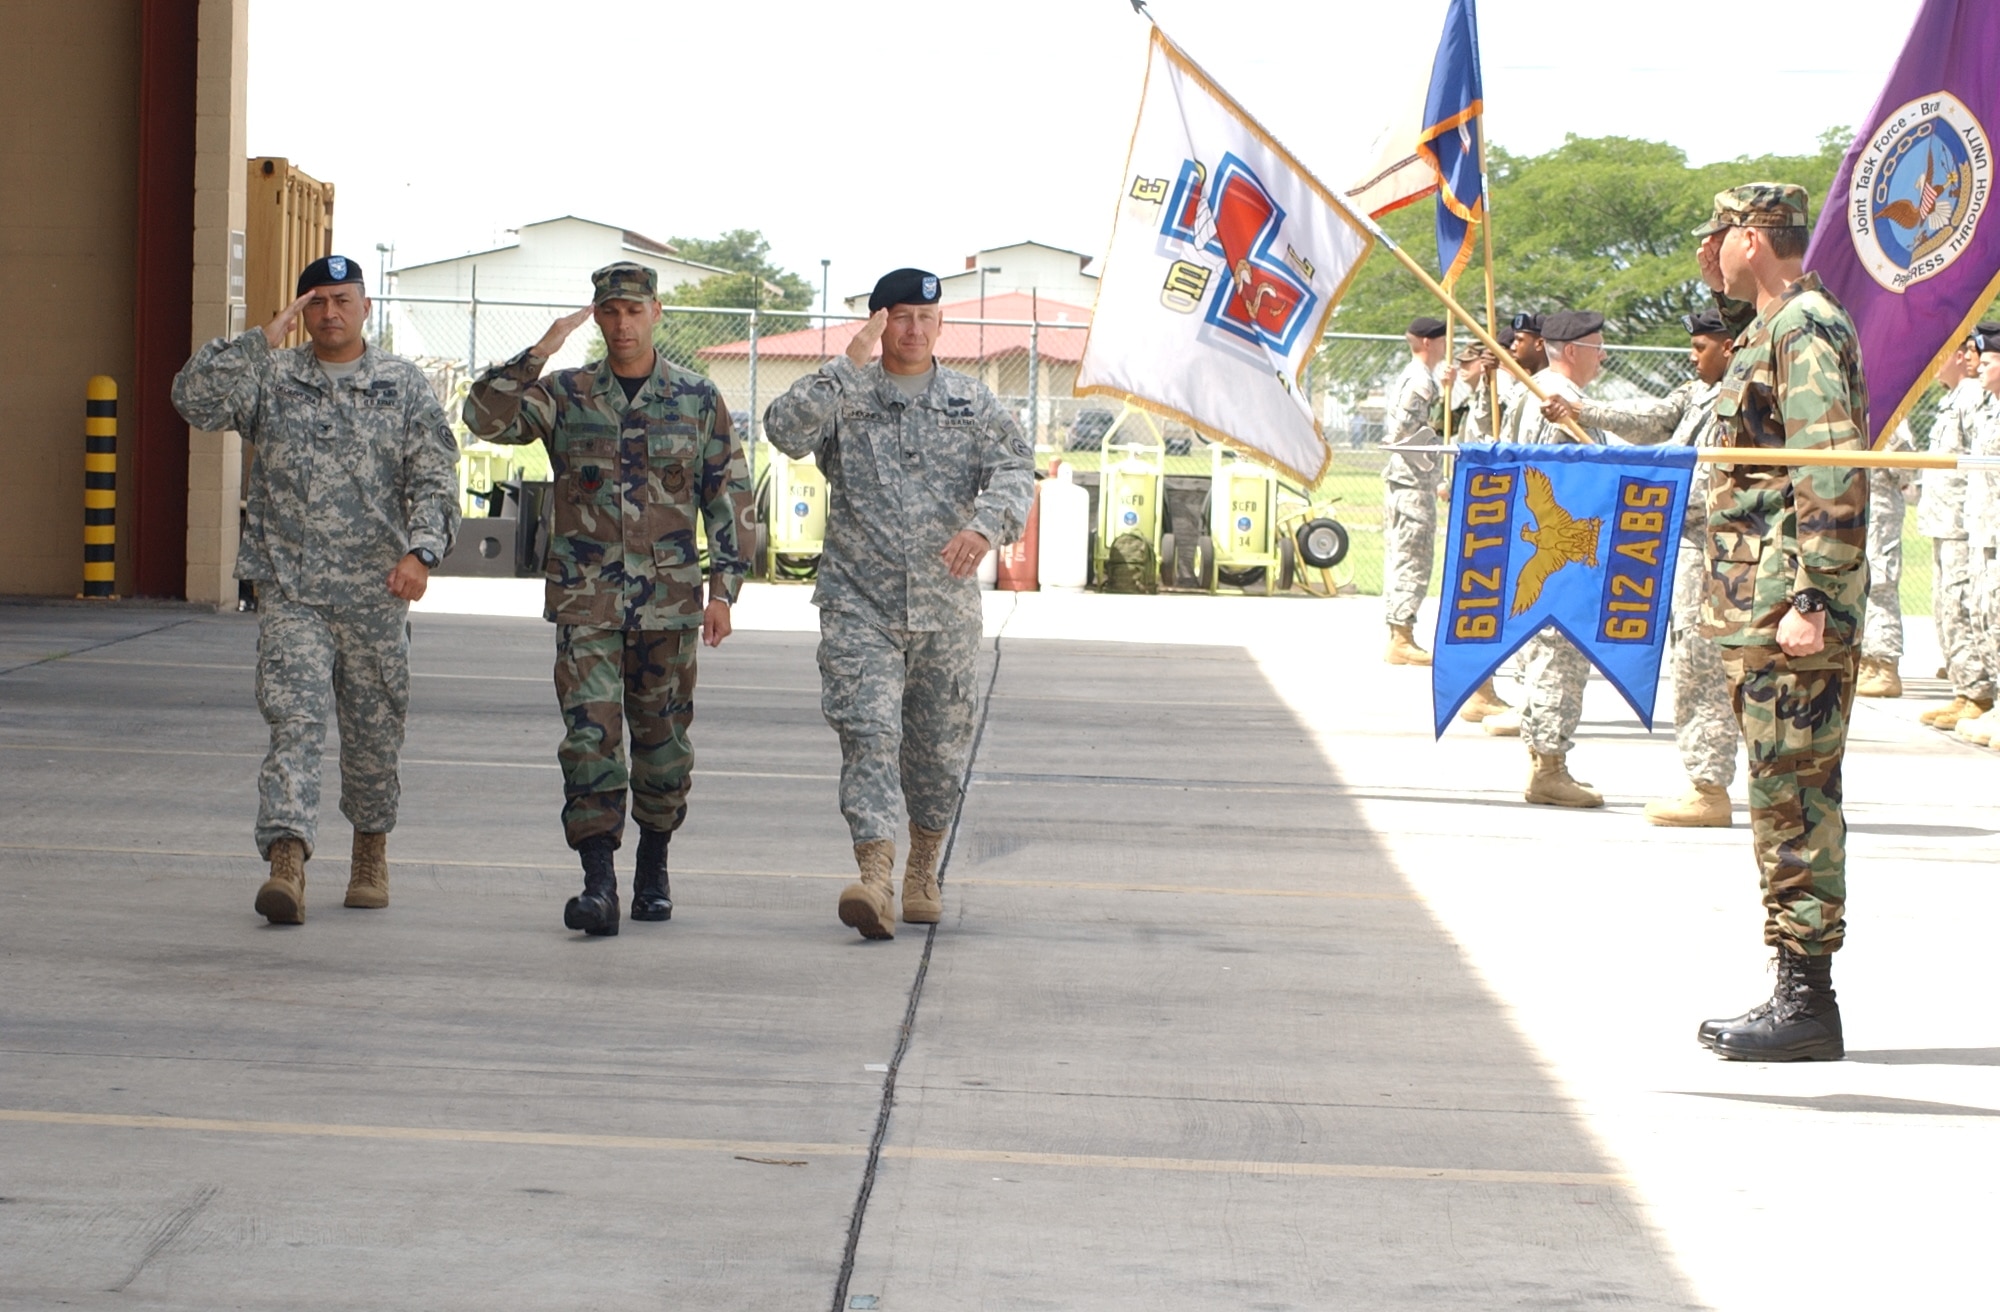 Army Col. Marcus DeOliveira, left, the incoming Joint Task Force-Bravo commander, Lt. Col. Howard Jones, JTF-Bravo deputy commander and Army Col. Christopher Hughes, outgoing JTF-Bravo commander, inspect the troops during the JTF-Bravo change of command ceremony at the Soto Cano Air Base Fire Station June 27. U.S. Air Force photo by Martin Chahin.